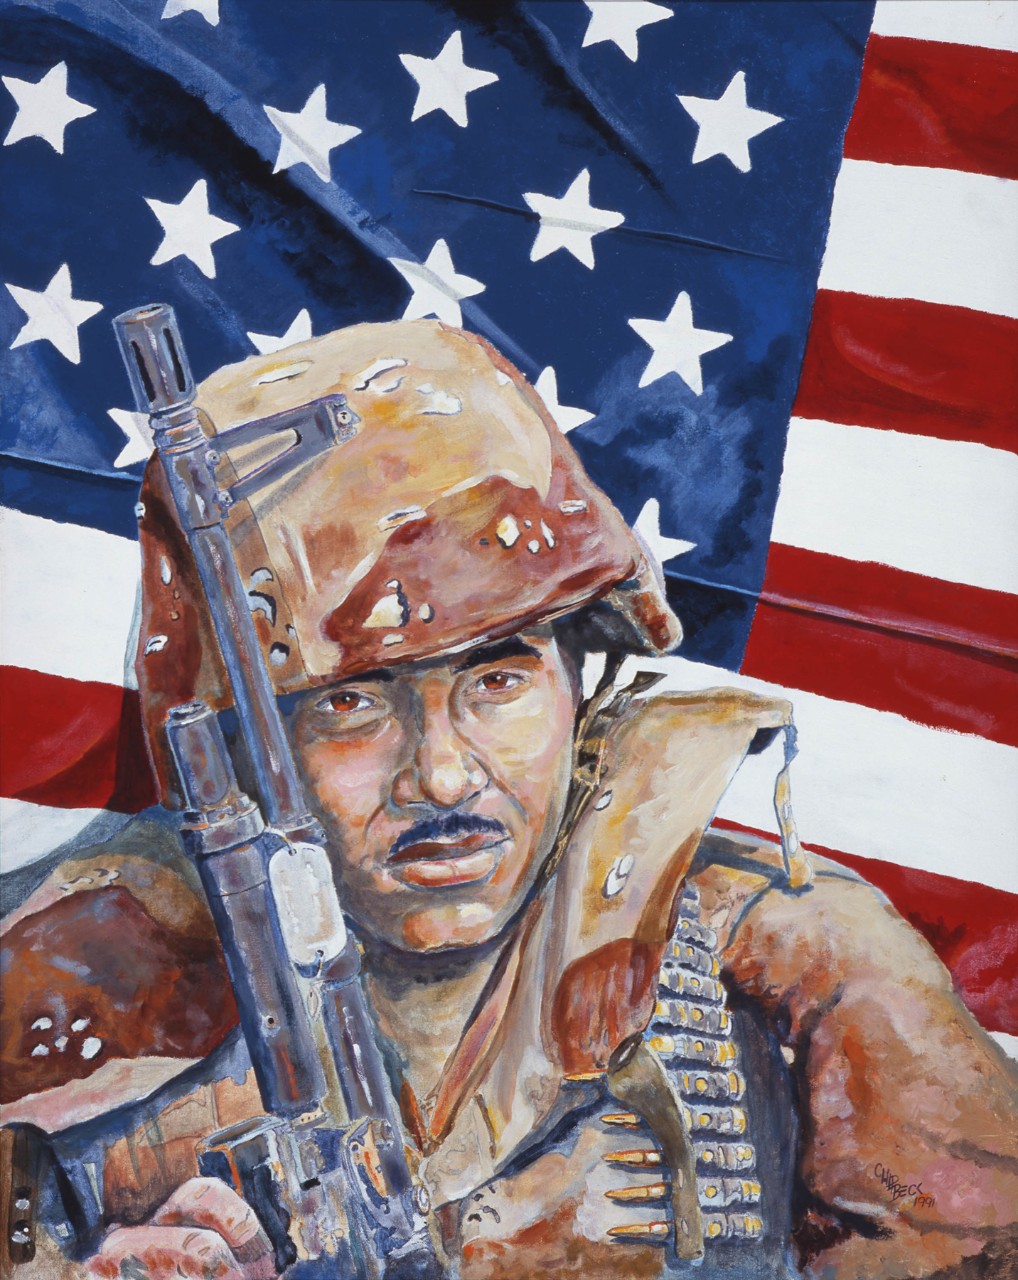 A soldier with the American flag as background